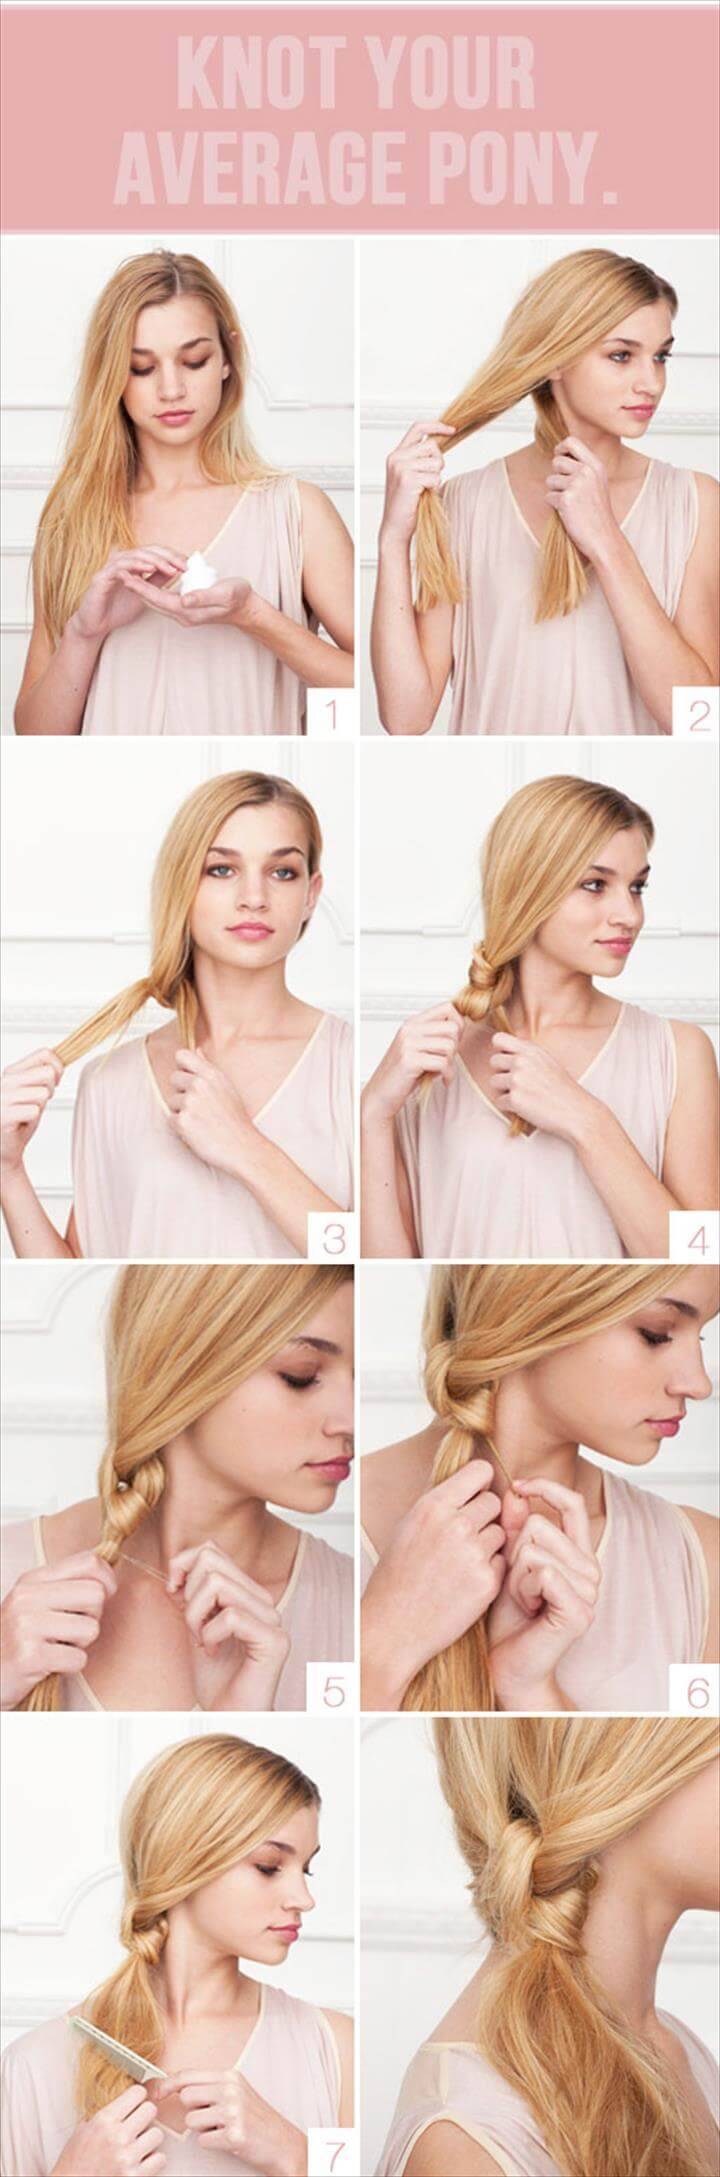 cute average pony knot hairstyle